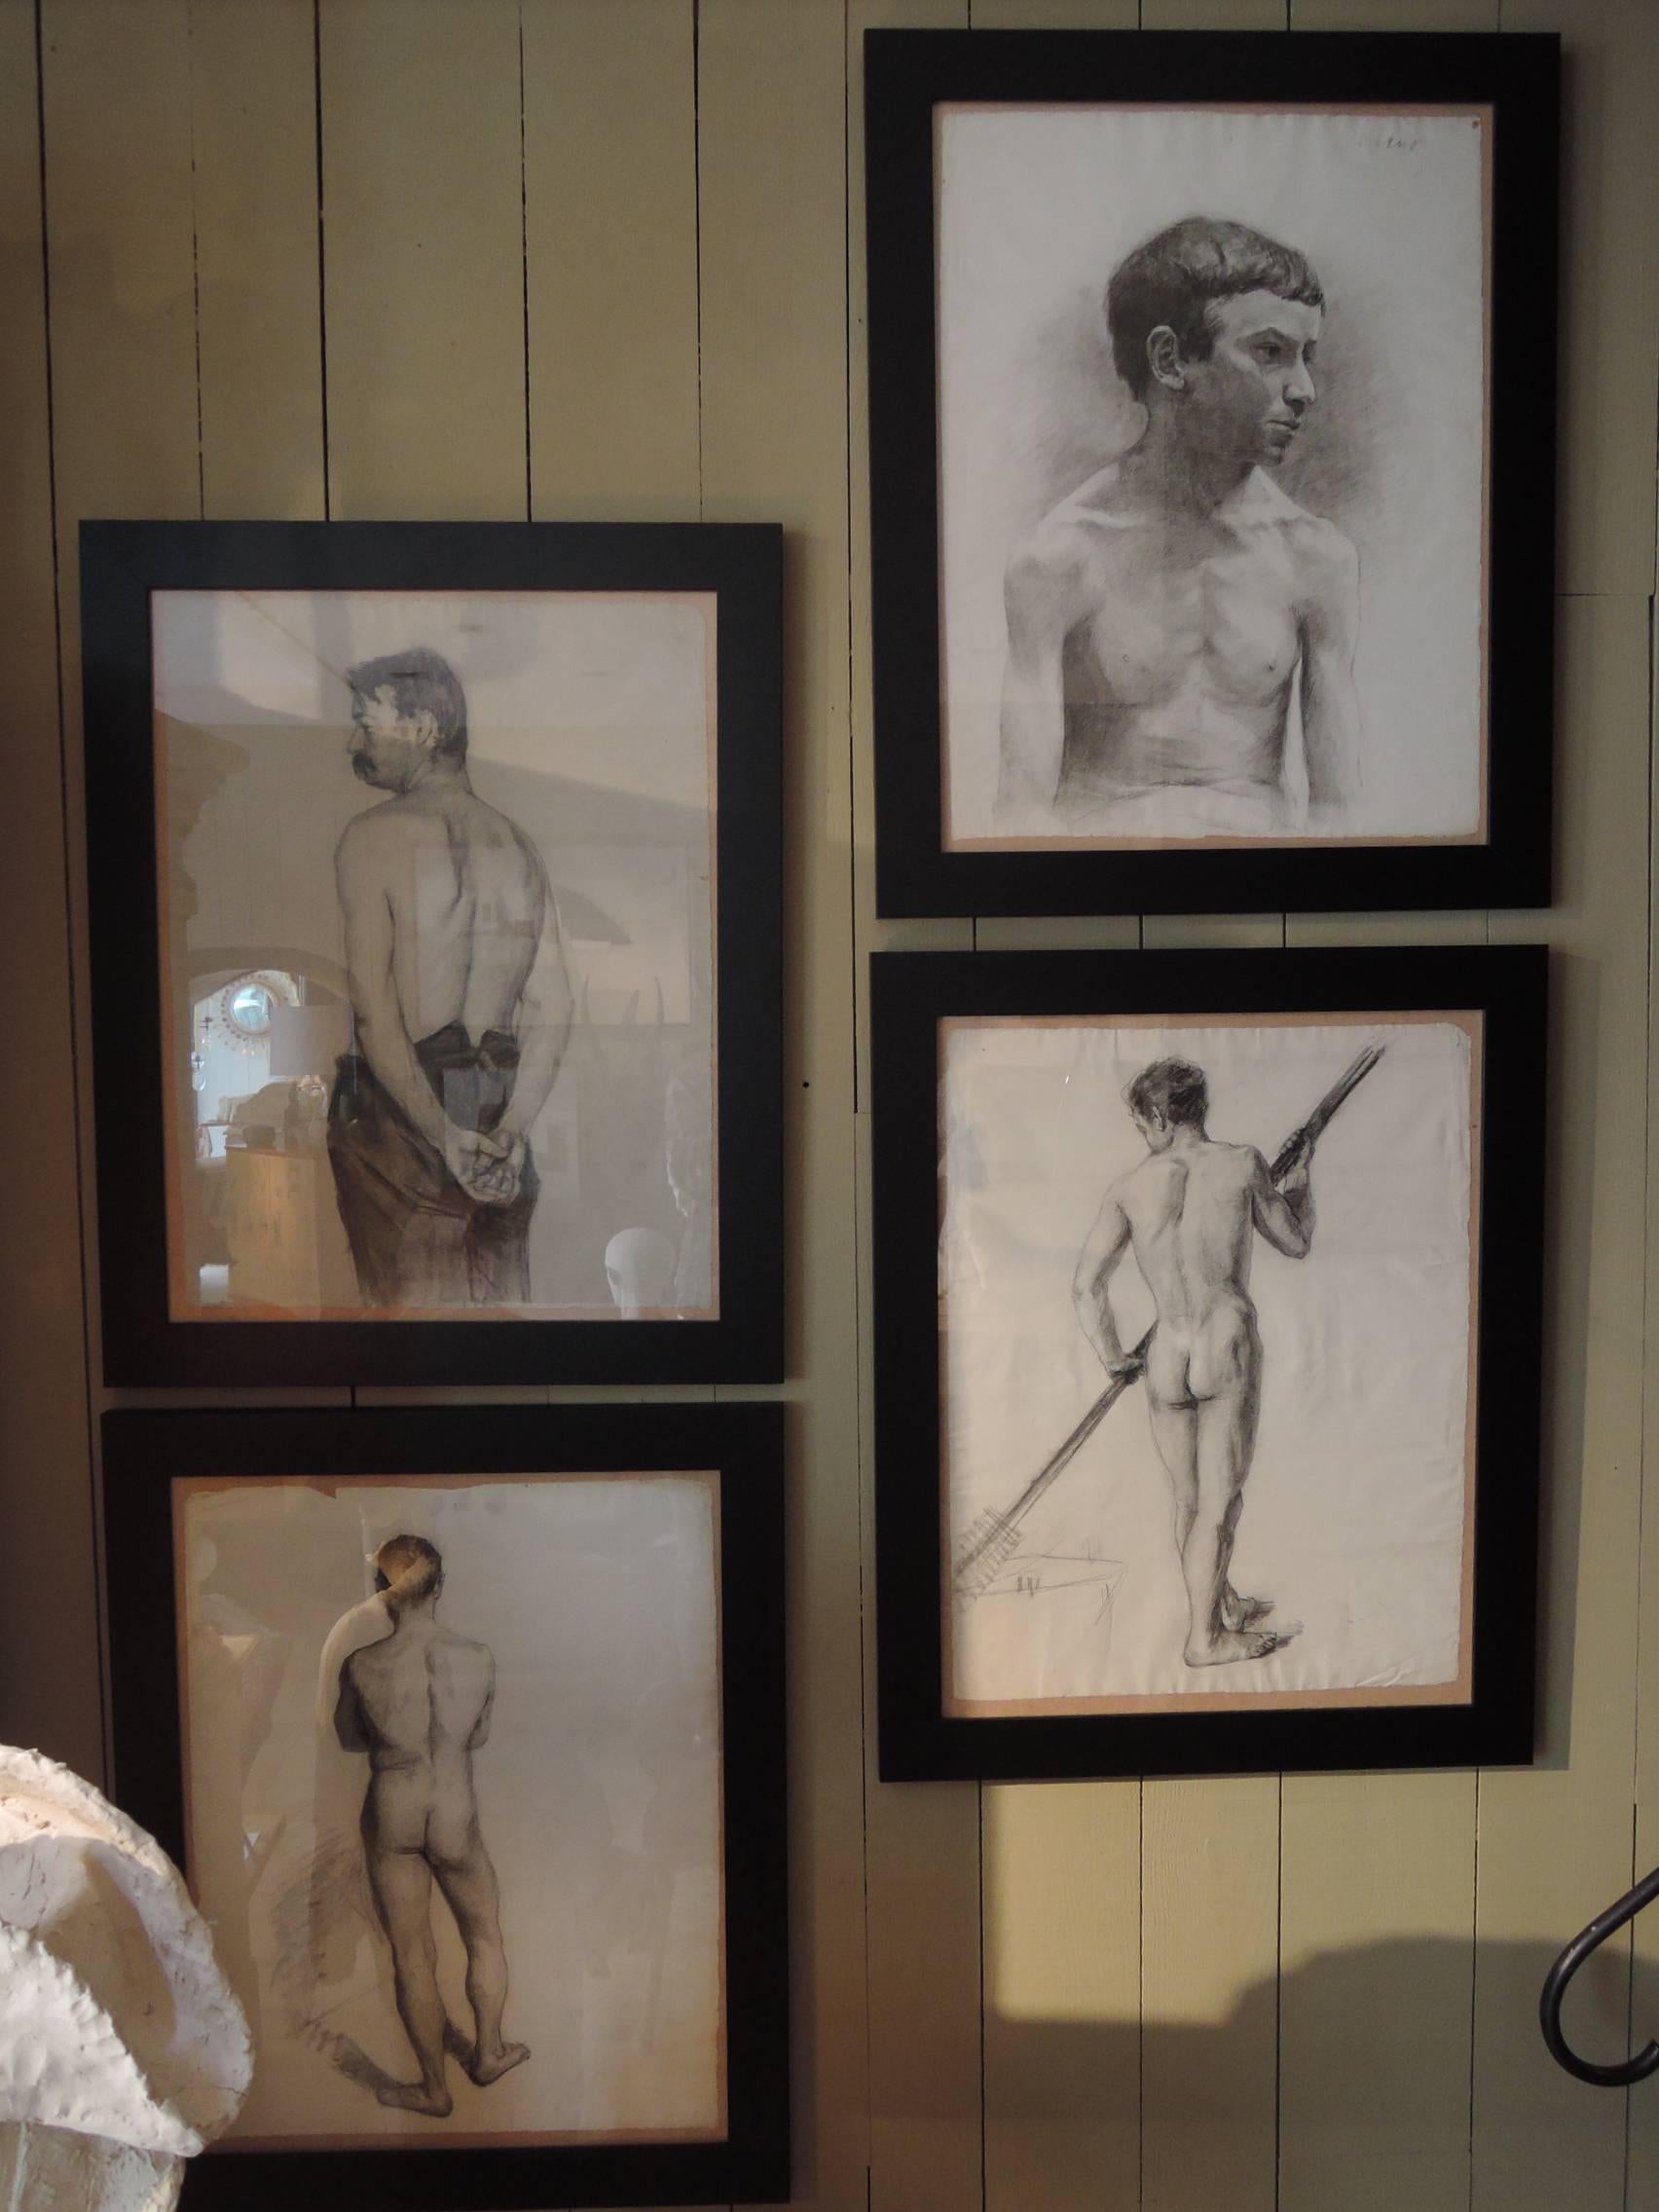 Charcoal and pencil drawing of men's studies in various poses and attitudes, end of 19th century from Sweden.
Beautiful design quality, some are signed by the artist Bildt, but not all. 
Each drawings are newly framed with a black frame, so final